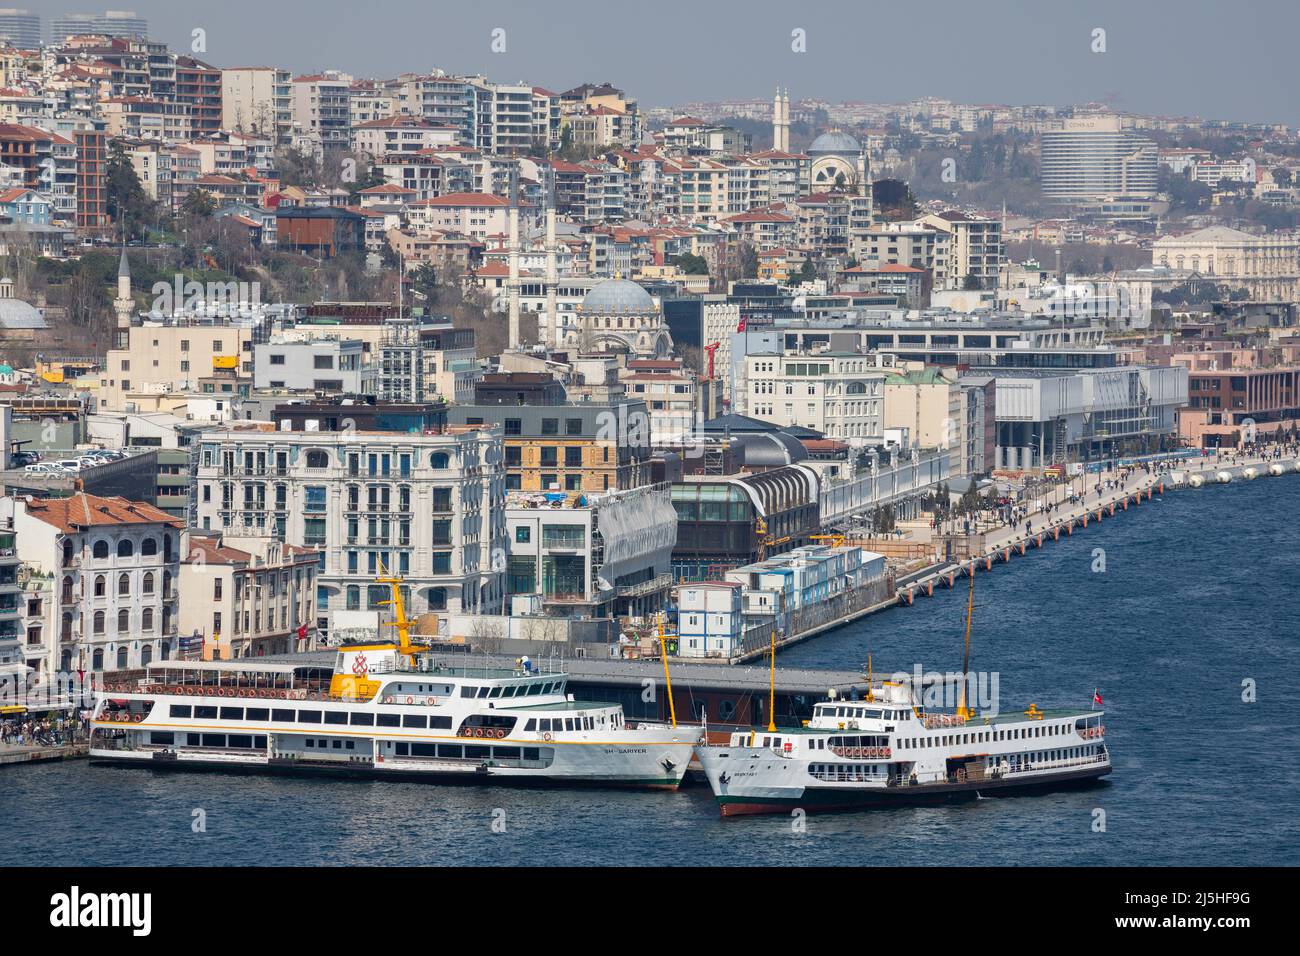 High angle zoomed view of Istanbul City Lines Ferry disembarking passengers at Karakoy pier on the Golden Horn with Galataport and Karakoy background. Stock Photo